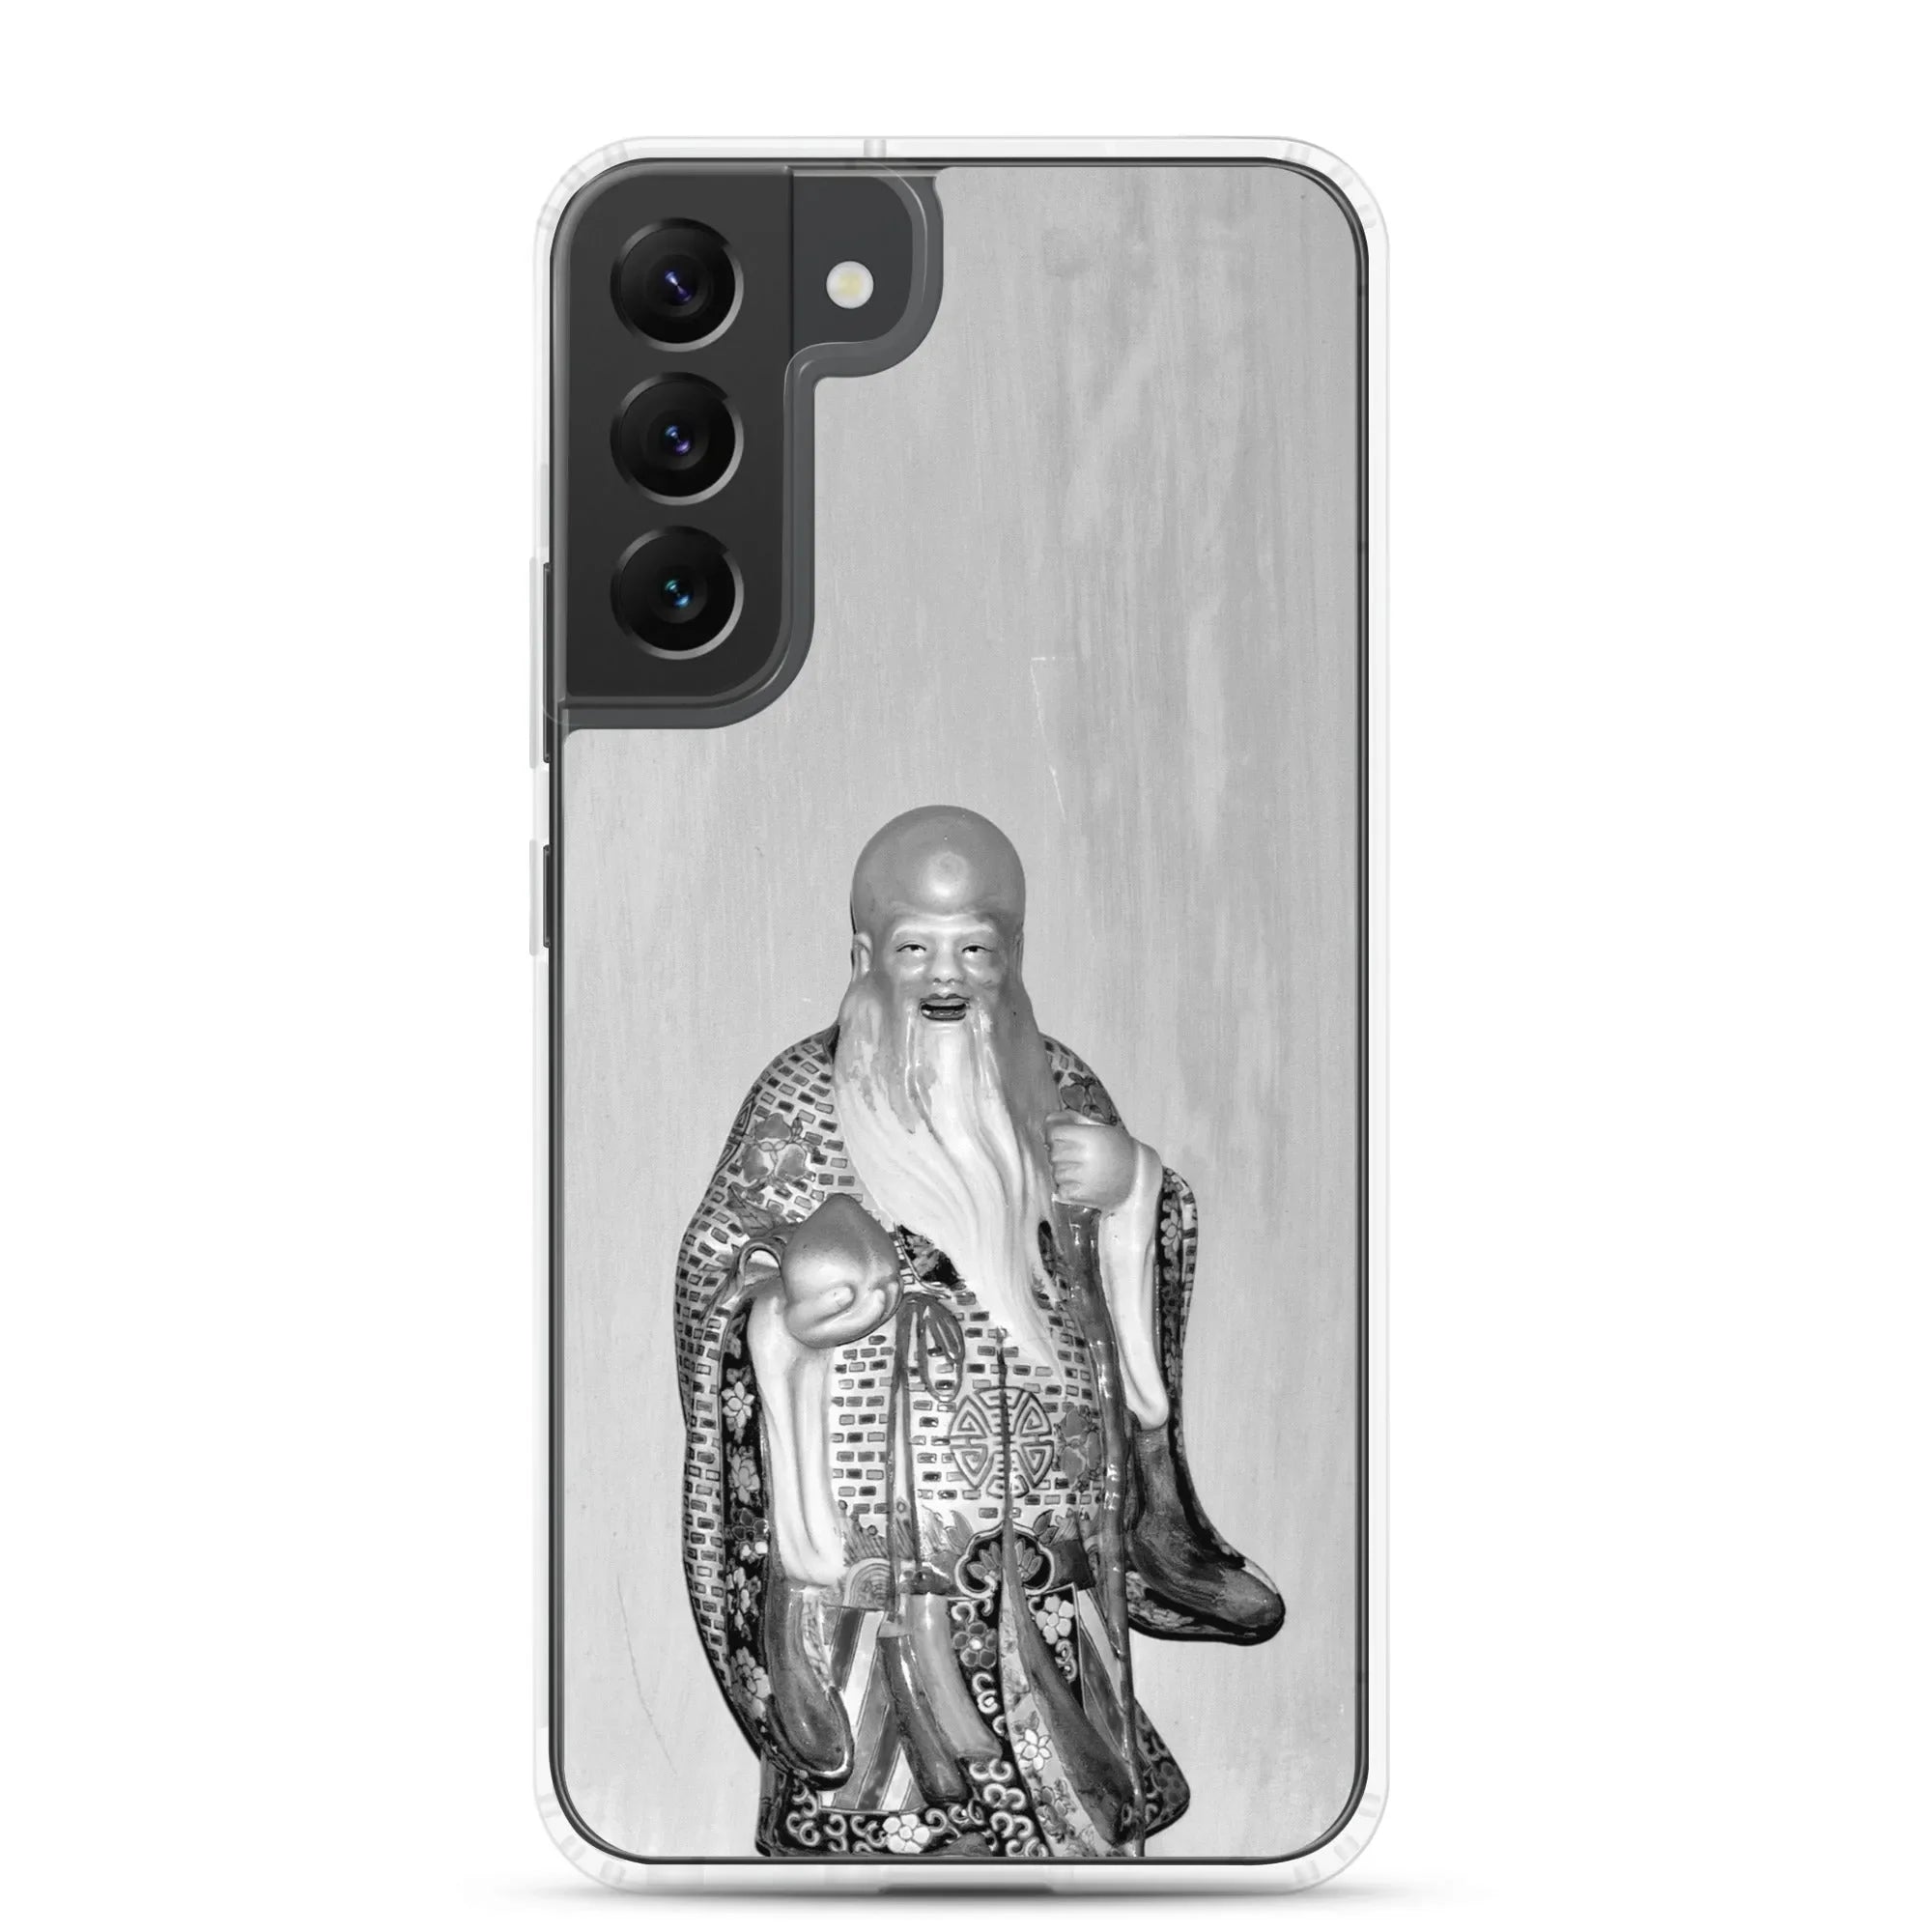 Flying Solo Samsung Galaxy Case - Black And White - Samsung Galaxy S22 Plus - Mobile Phone Cases - Aesthetic Art